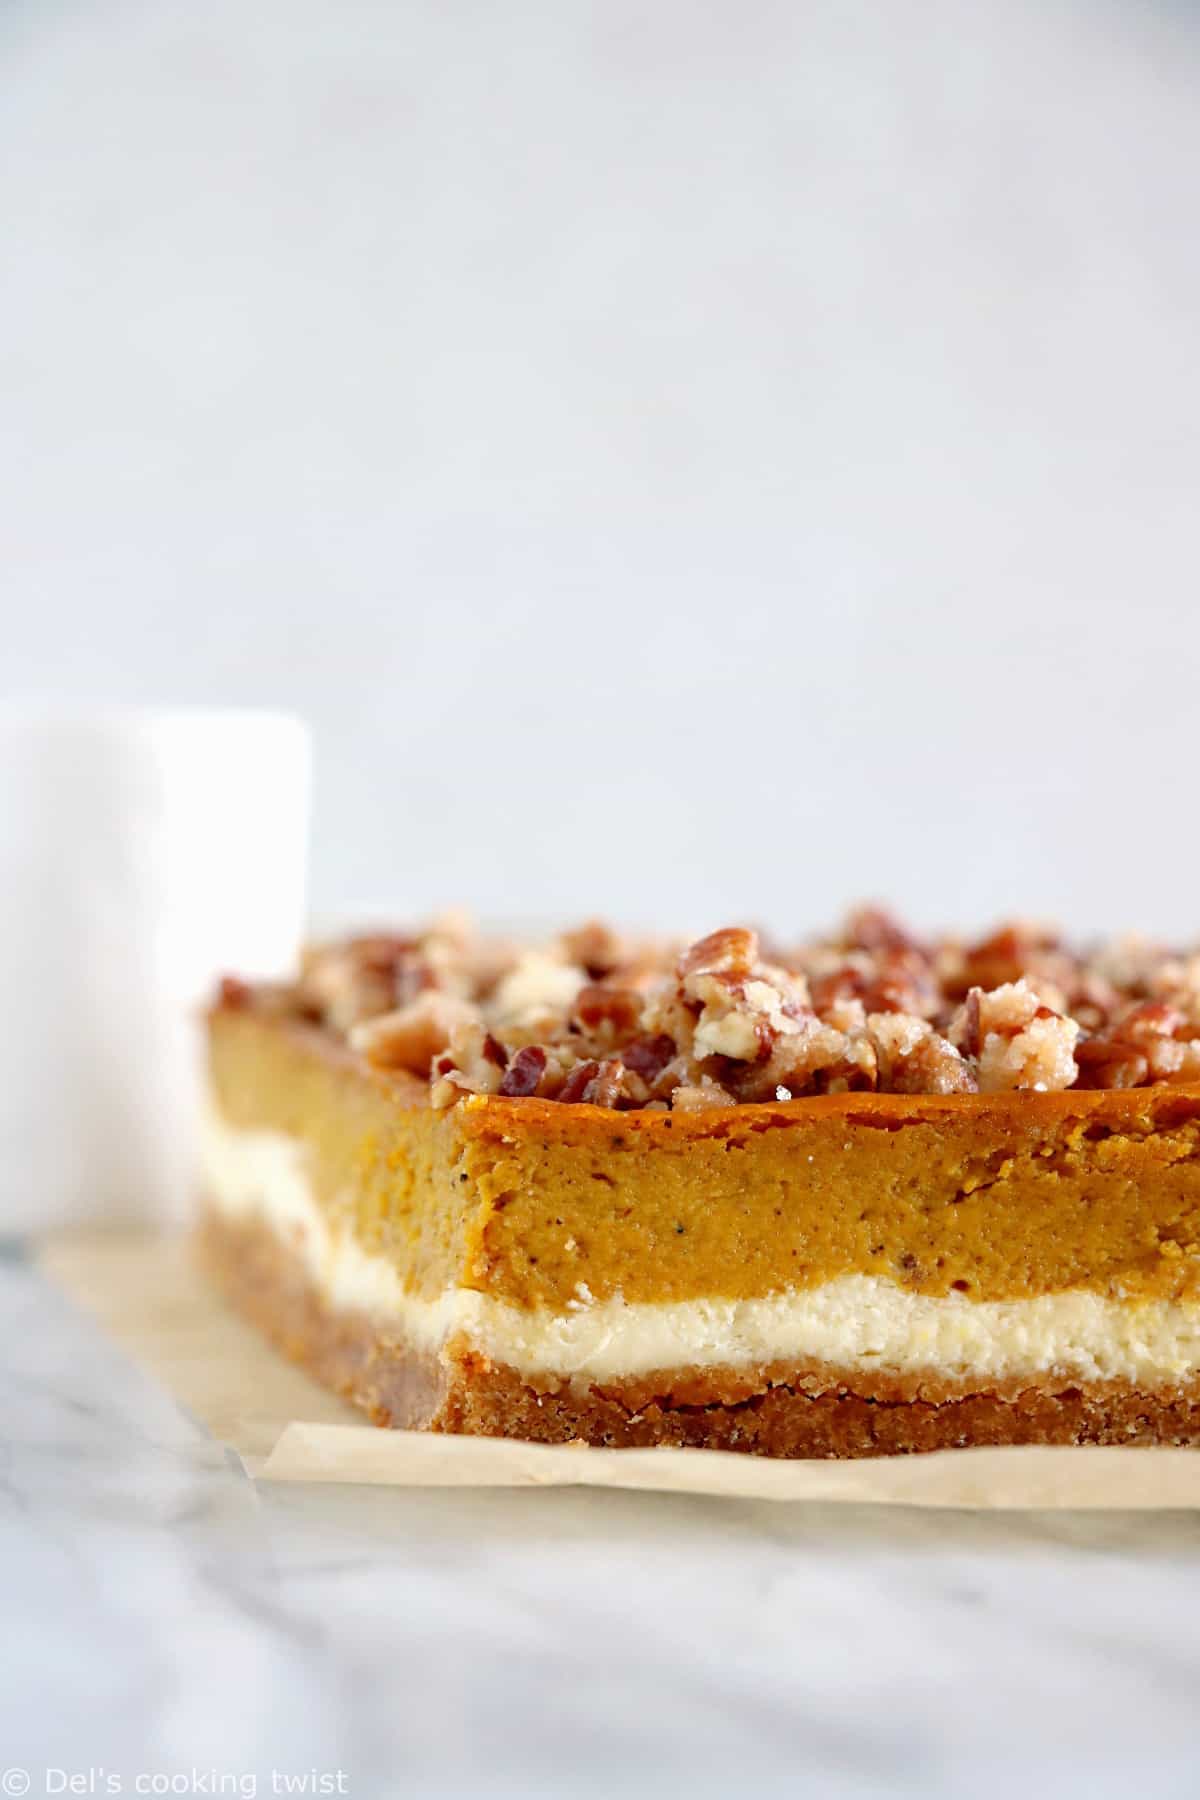 Pumpkin Cheesecake Bars with Candied Pecans - Del's cooking twist